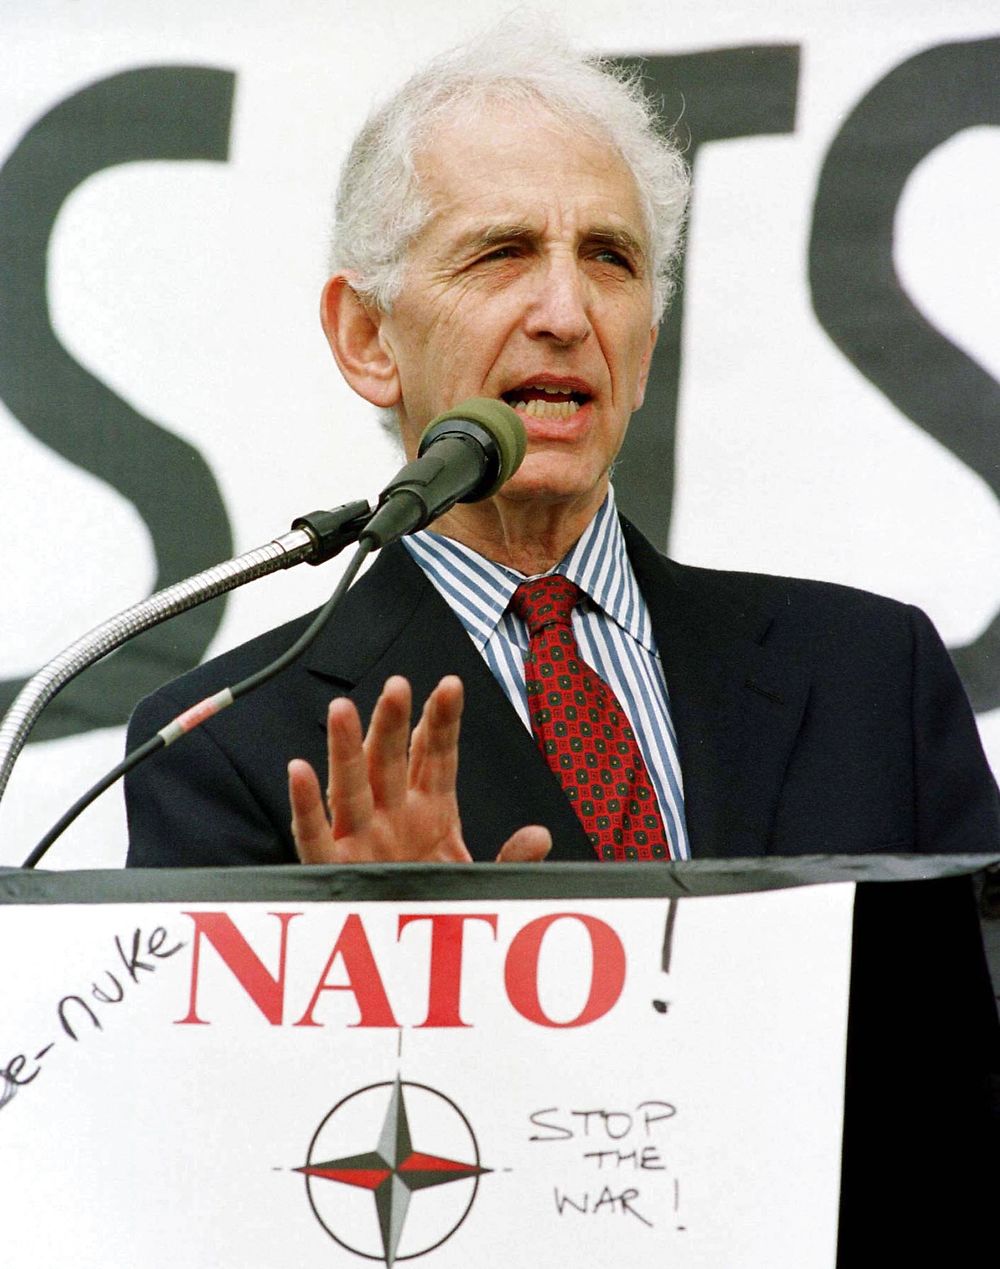 Daniel Ellsberg speaks out during a protest rally against NATO involvement in Yugoslavia in this April 23, 1999 file photo. When Pentagon Papers whistle-blower Ellsberg wrote a new memoir chronicling his decision to leak secret U.S. military documents exposing official lies about the Vietnam War, he had no inkling the United States could soon be at war with Iraq. A week after the October 2002 release of his book, "Secrets: A Memoir of Vietnam and the Pentagon Papers, " Congress authorized President George W. Bush to wage war if necessary to disarm Baghdad. REUTERS/Photo by Mike Theiler/Files